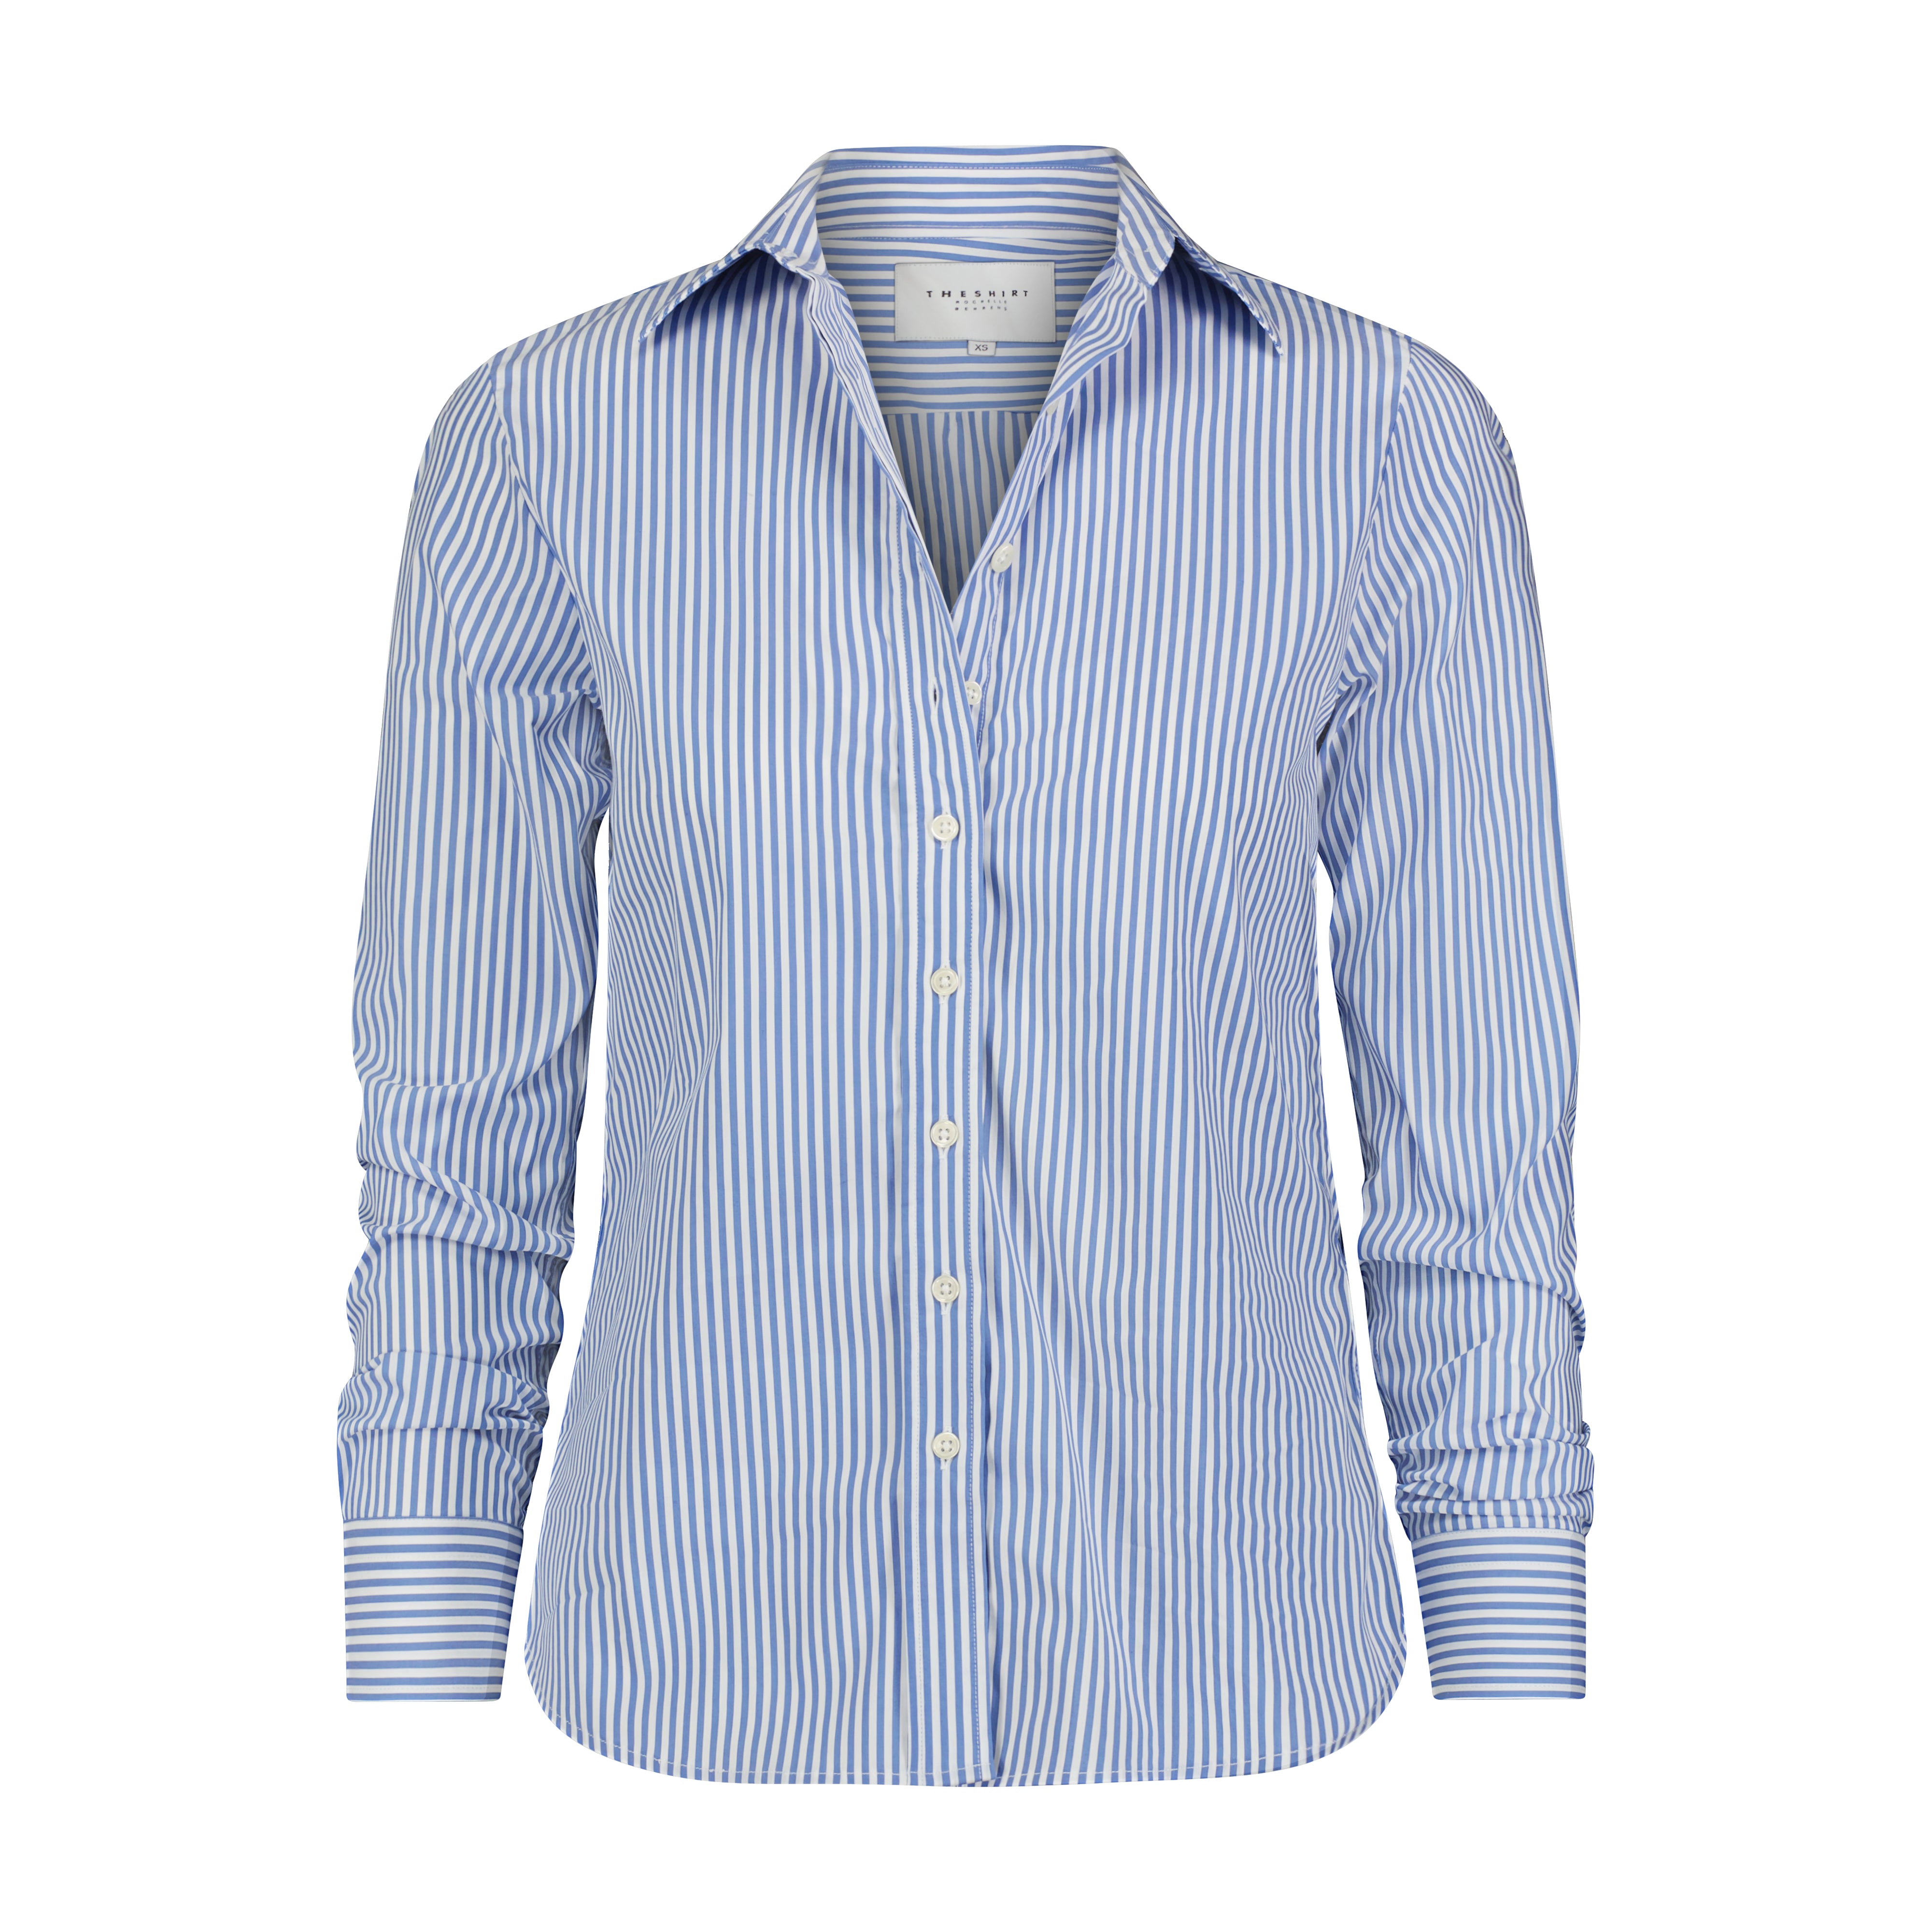 The Shirt by Rochelle Behrens - The Icon Shirt in Stripe - Blue/White ...